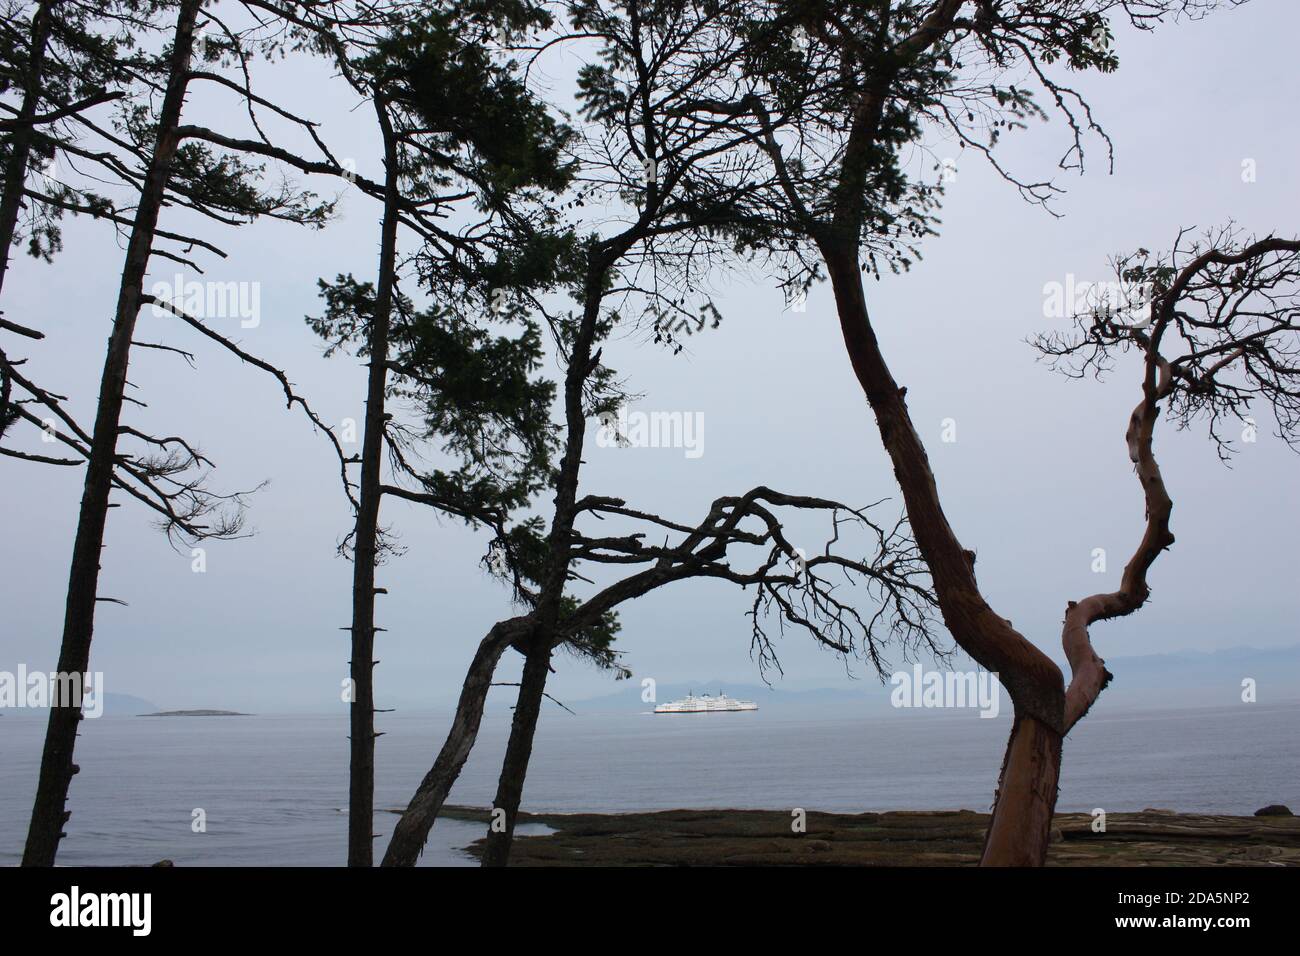 Tree silhouettes with a distant ferry seen from near the Malaspina Galleries on Gabriola Island, British Columbia, Canada Stock Photo